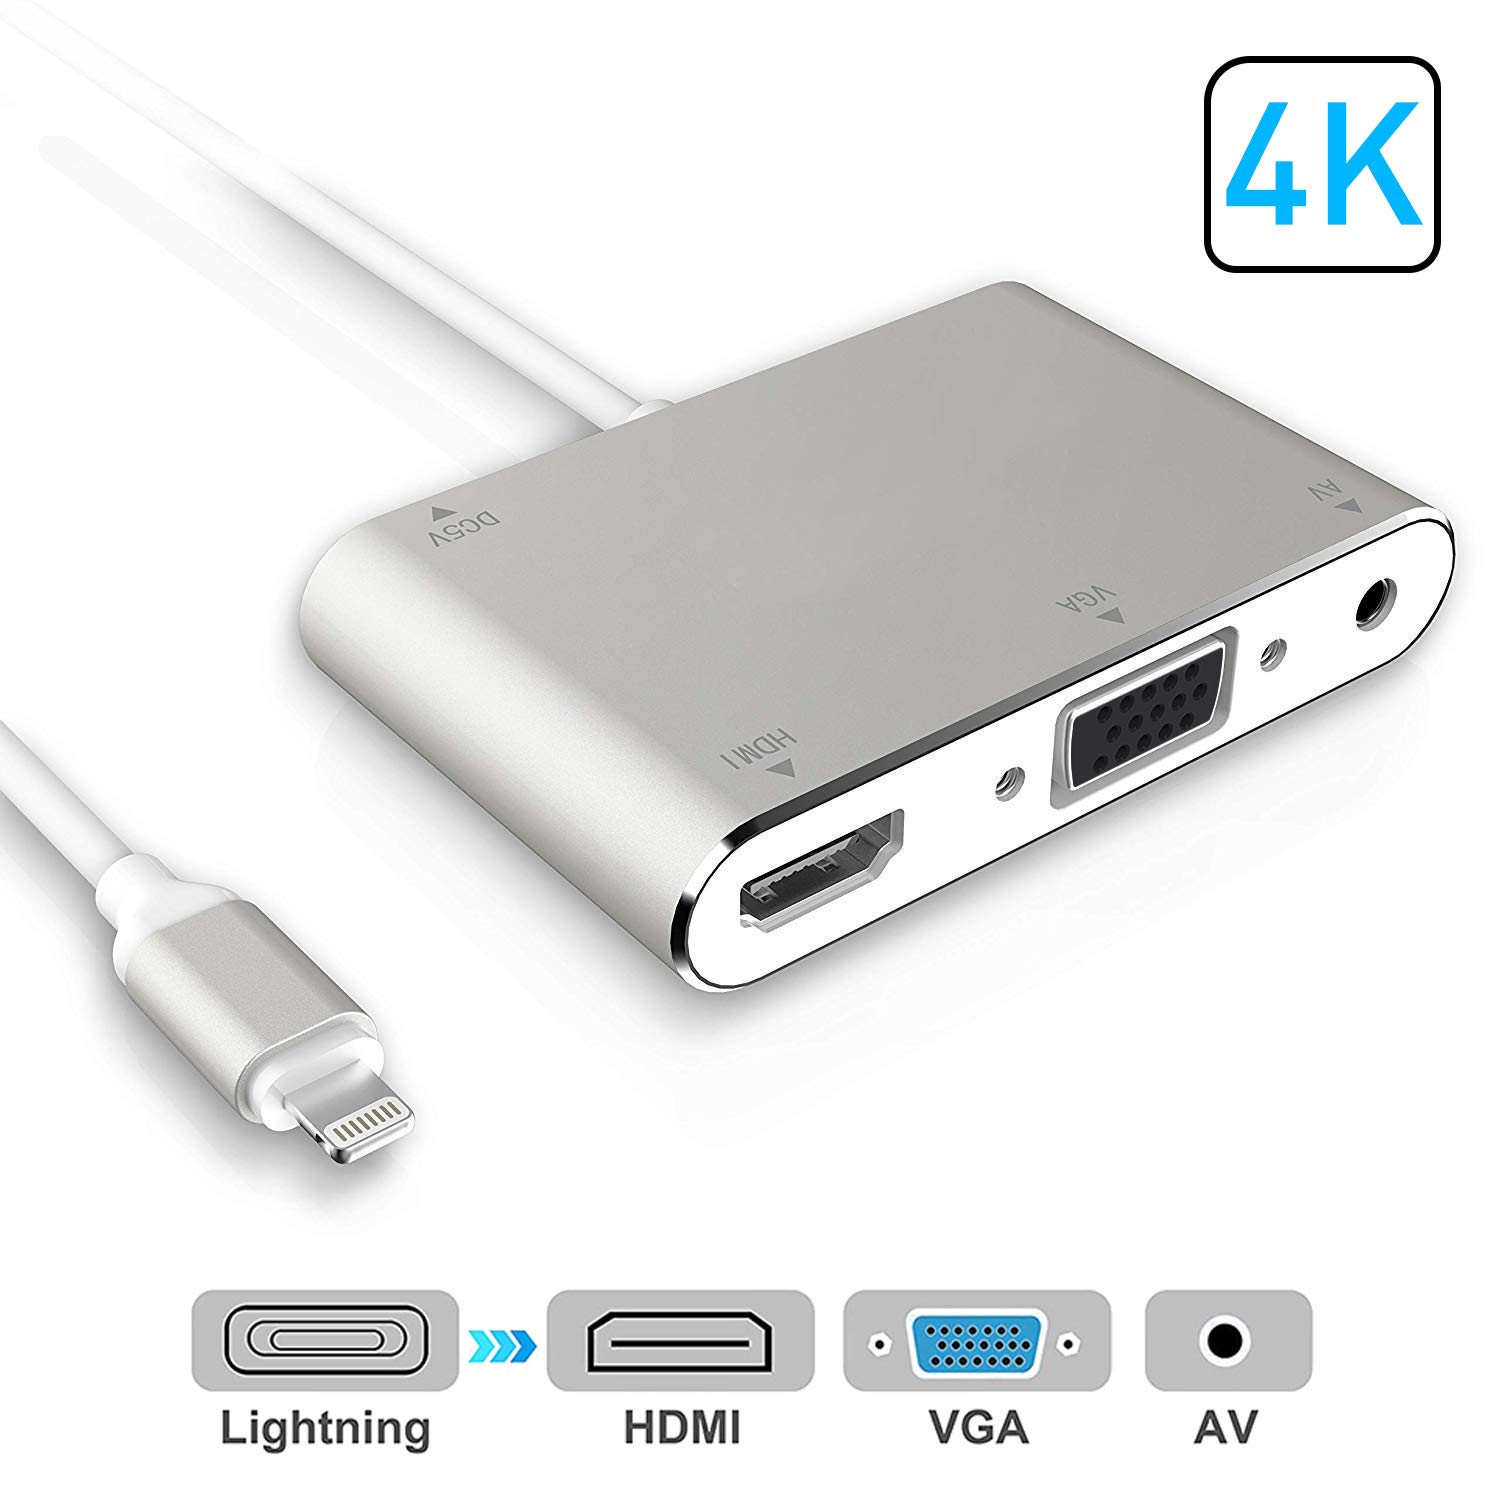 Digital HDMI Adapter Converter New Edition 2 in 1 Connector Latest Plug and Play Converter Compatible with iPhone XR iPhone X/8/7/Plus iPad iPod 